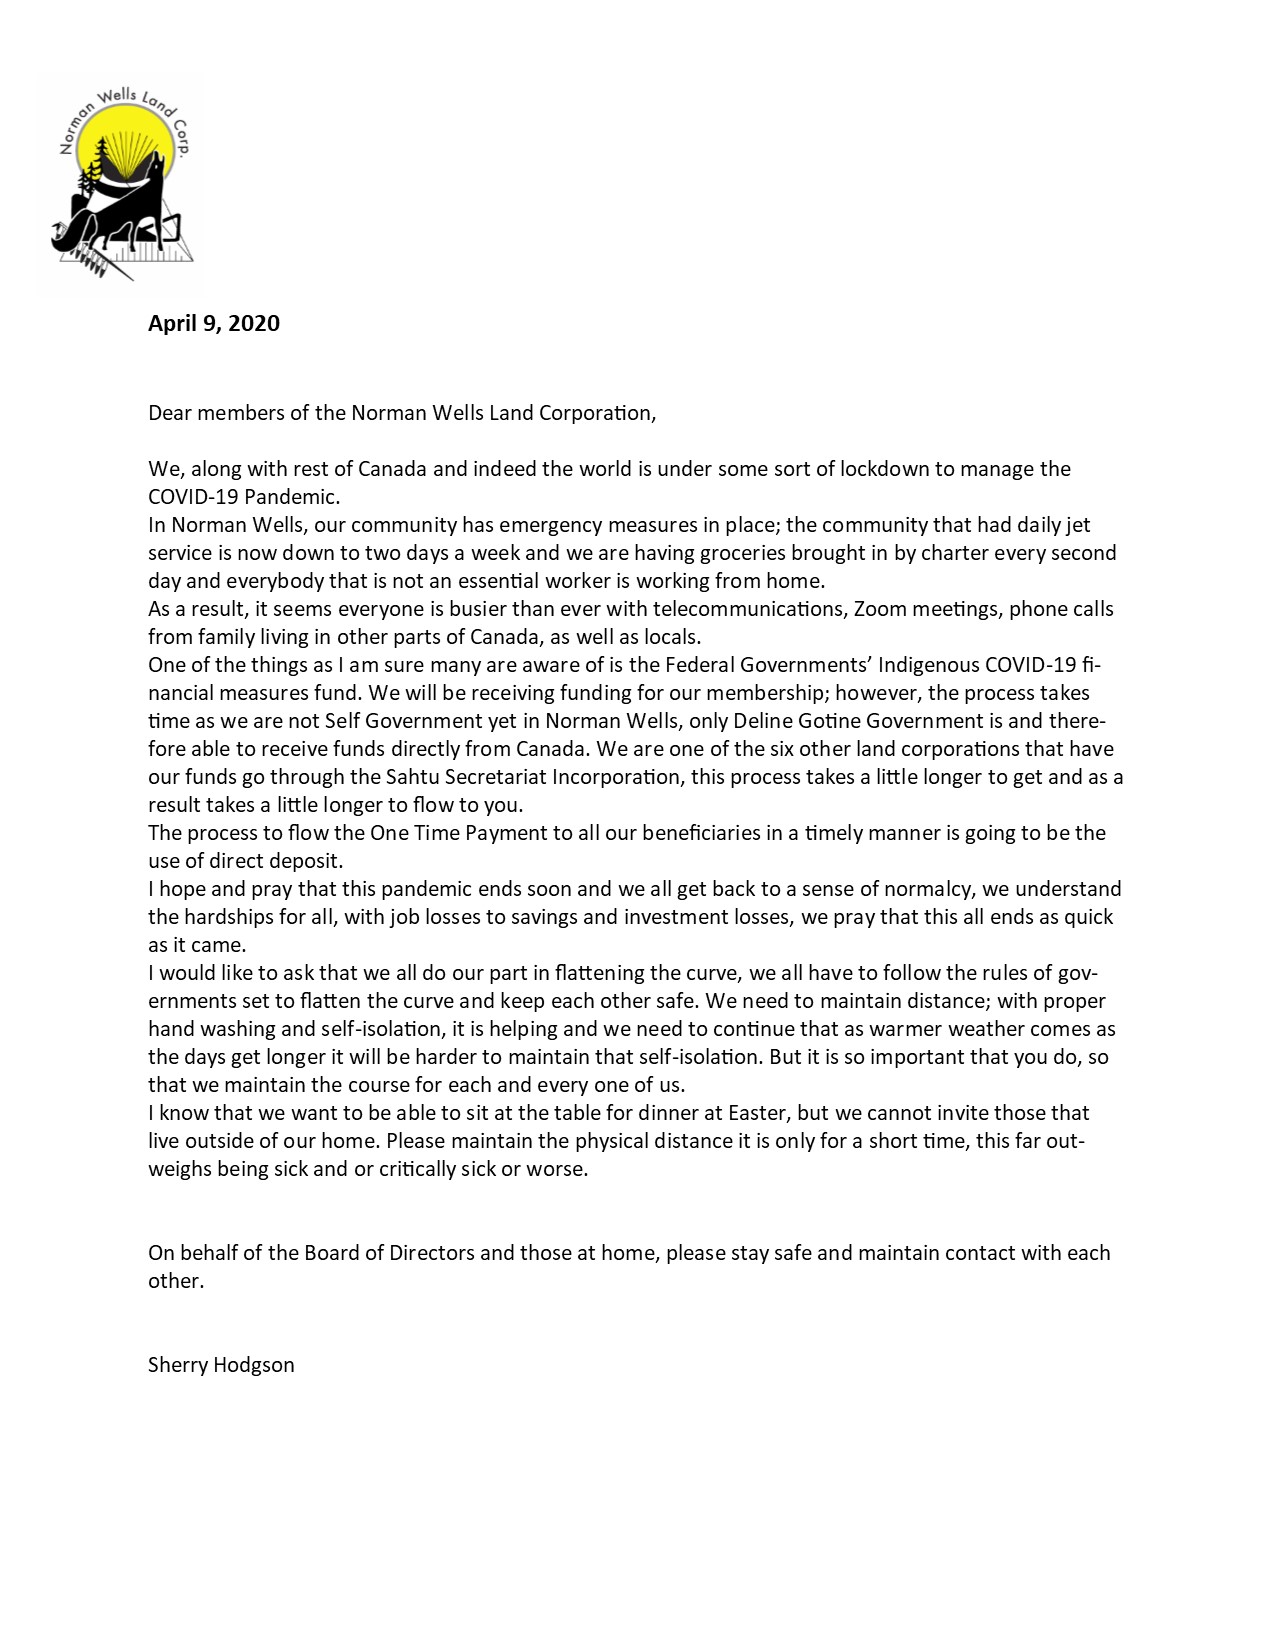 COVID 19 NWLC Presidents Letter